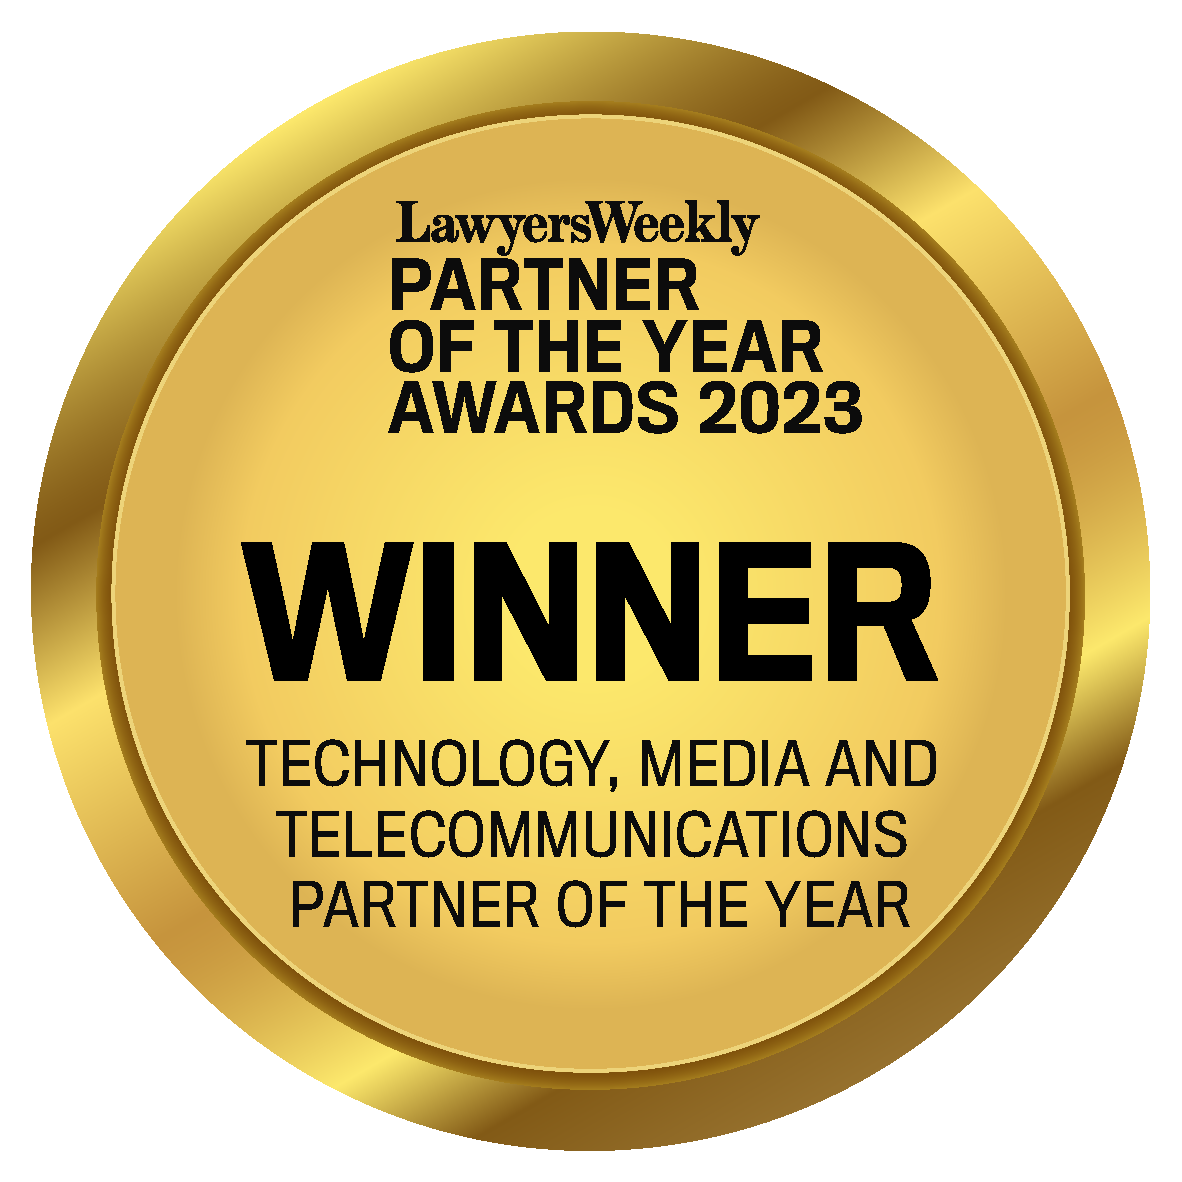 Winners_Technology, Media and Telecommunications Partner of the Year